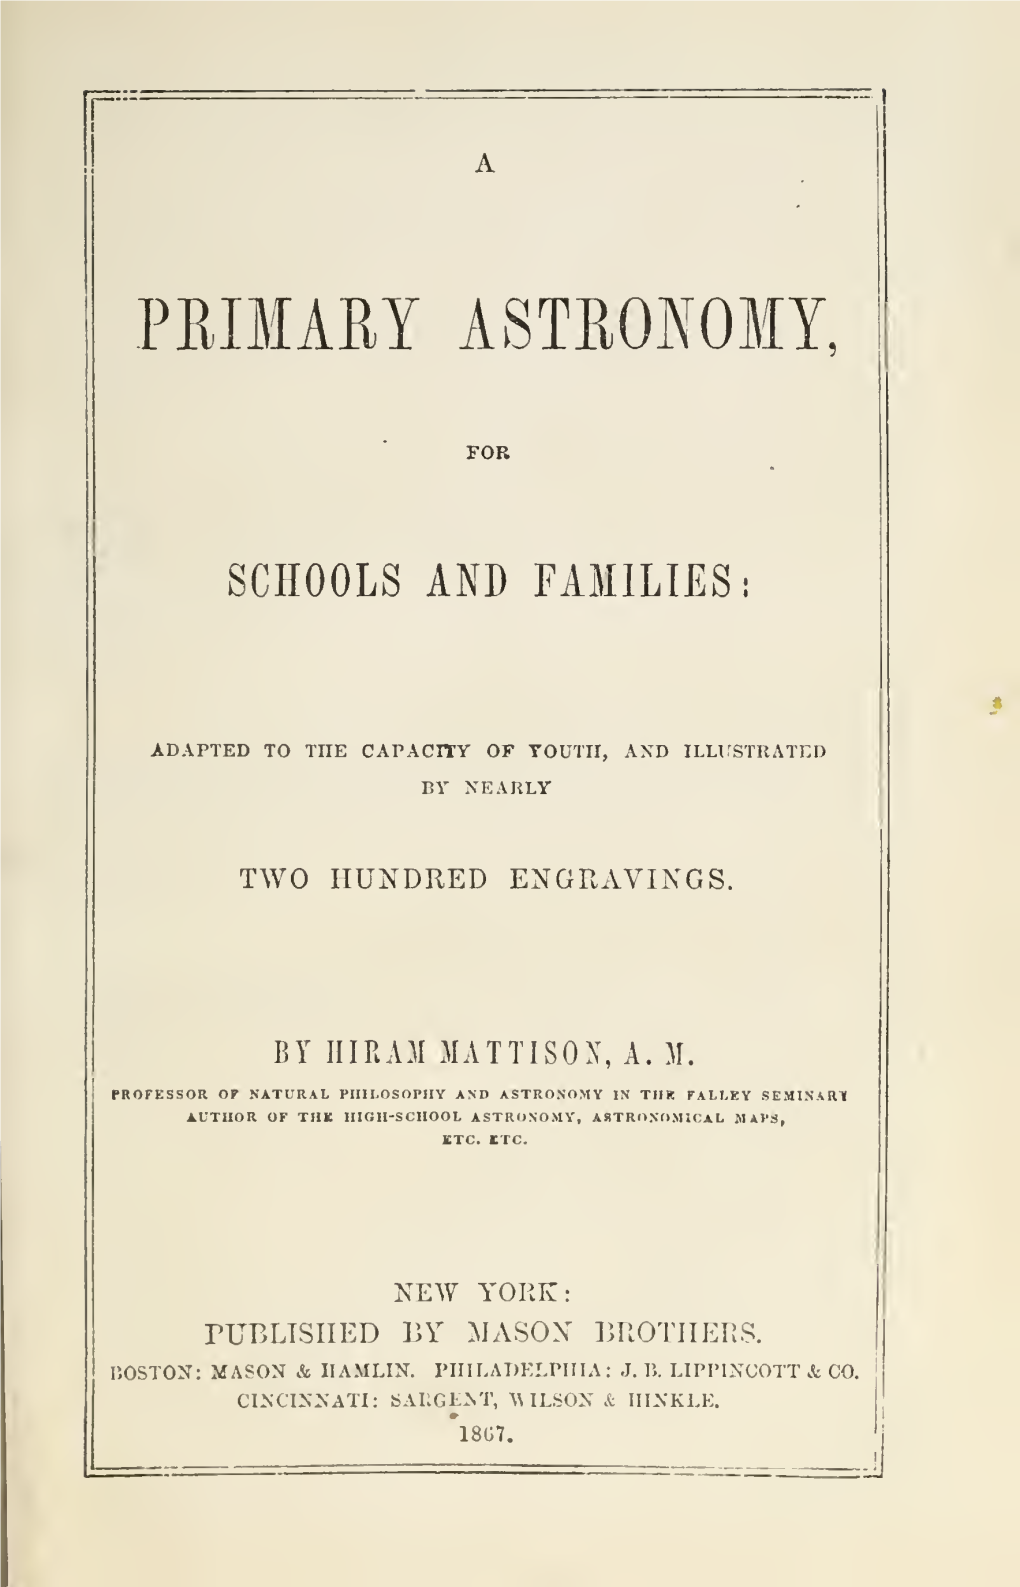 A Primary Astronomy for Schools and Families